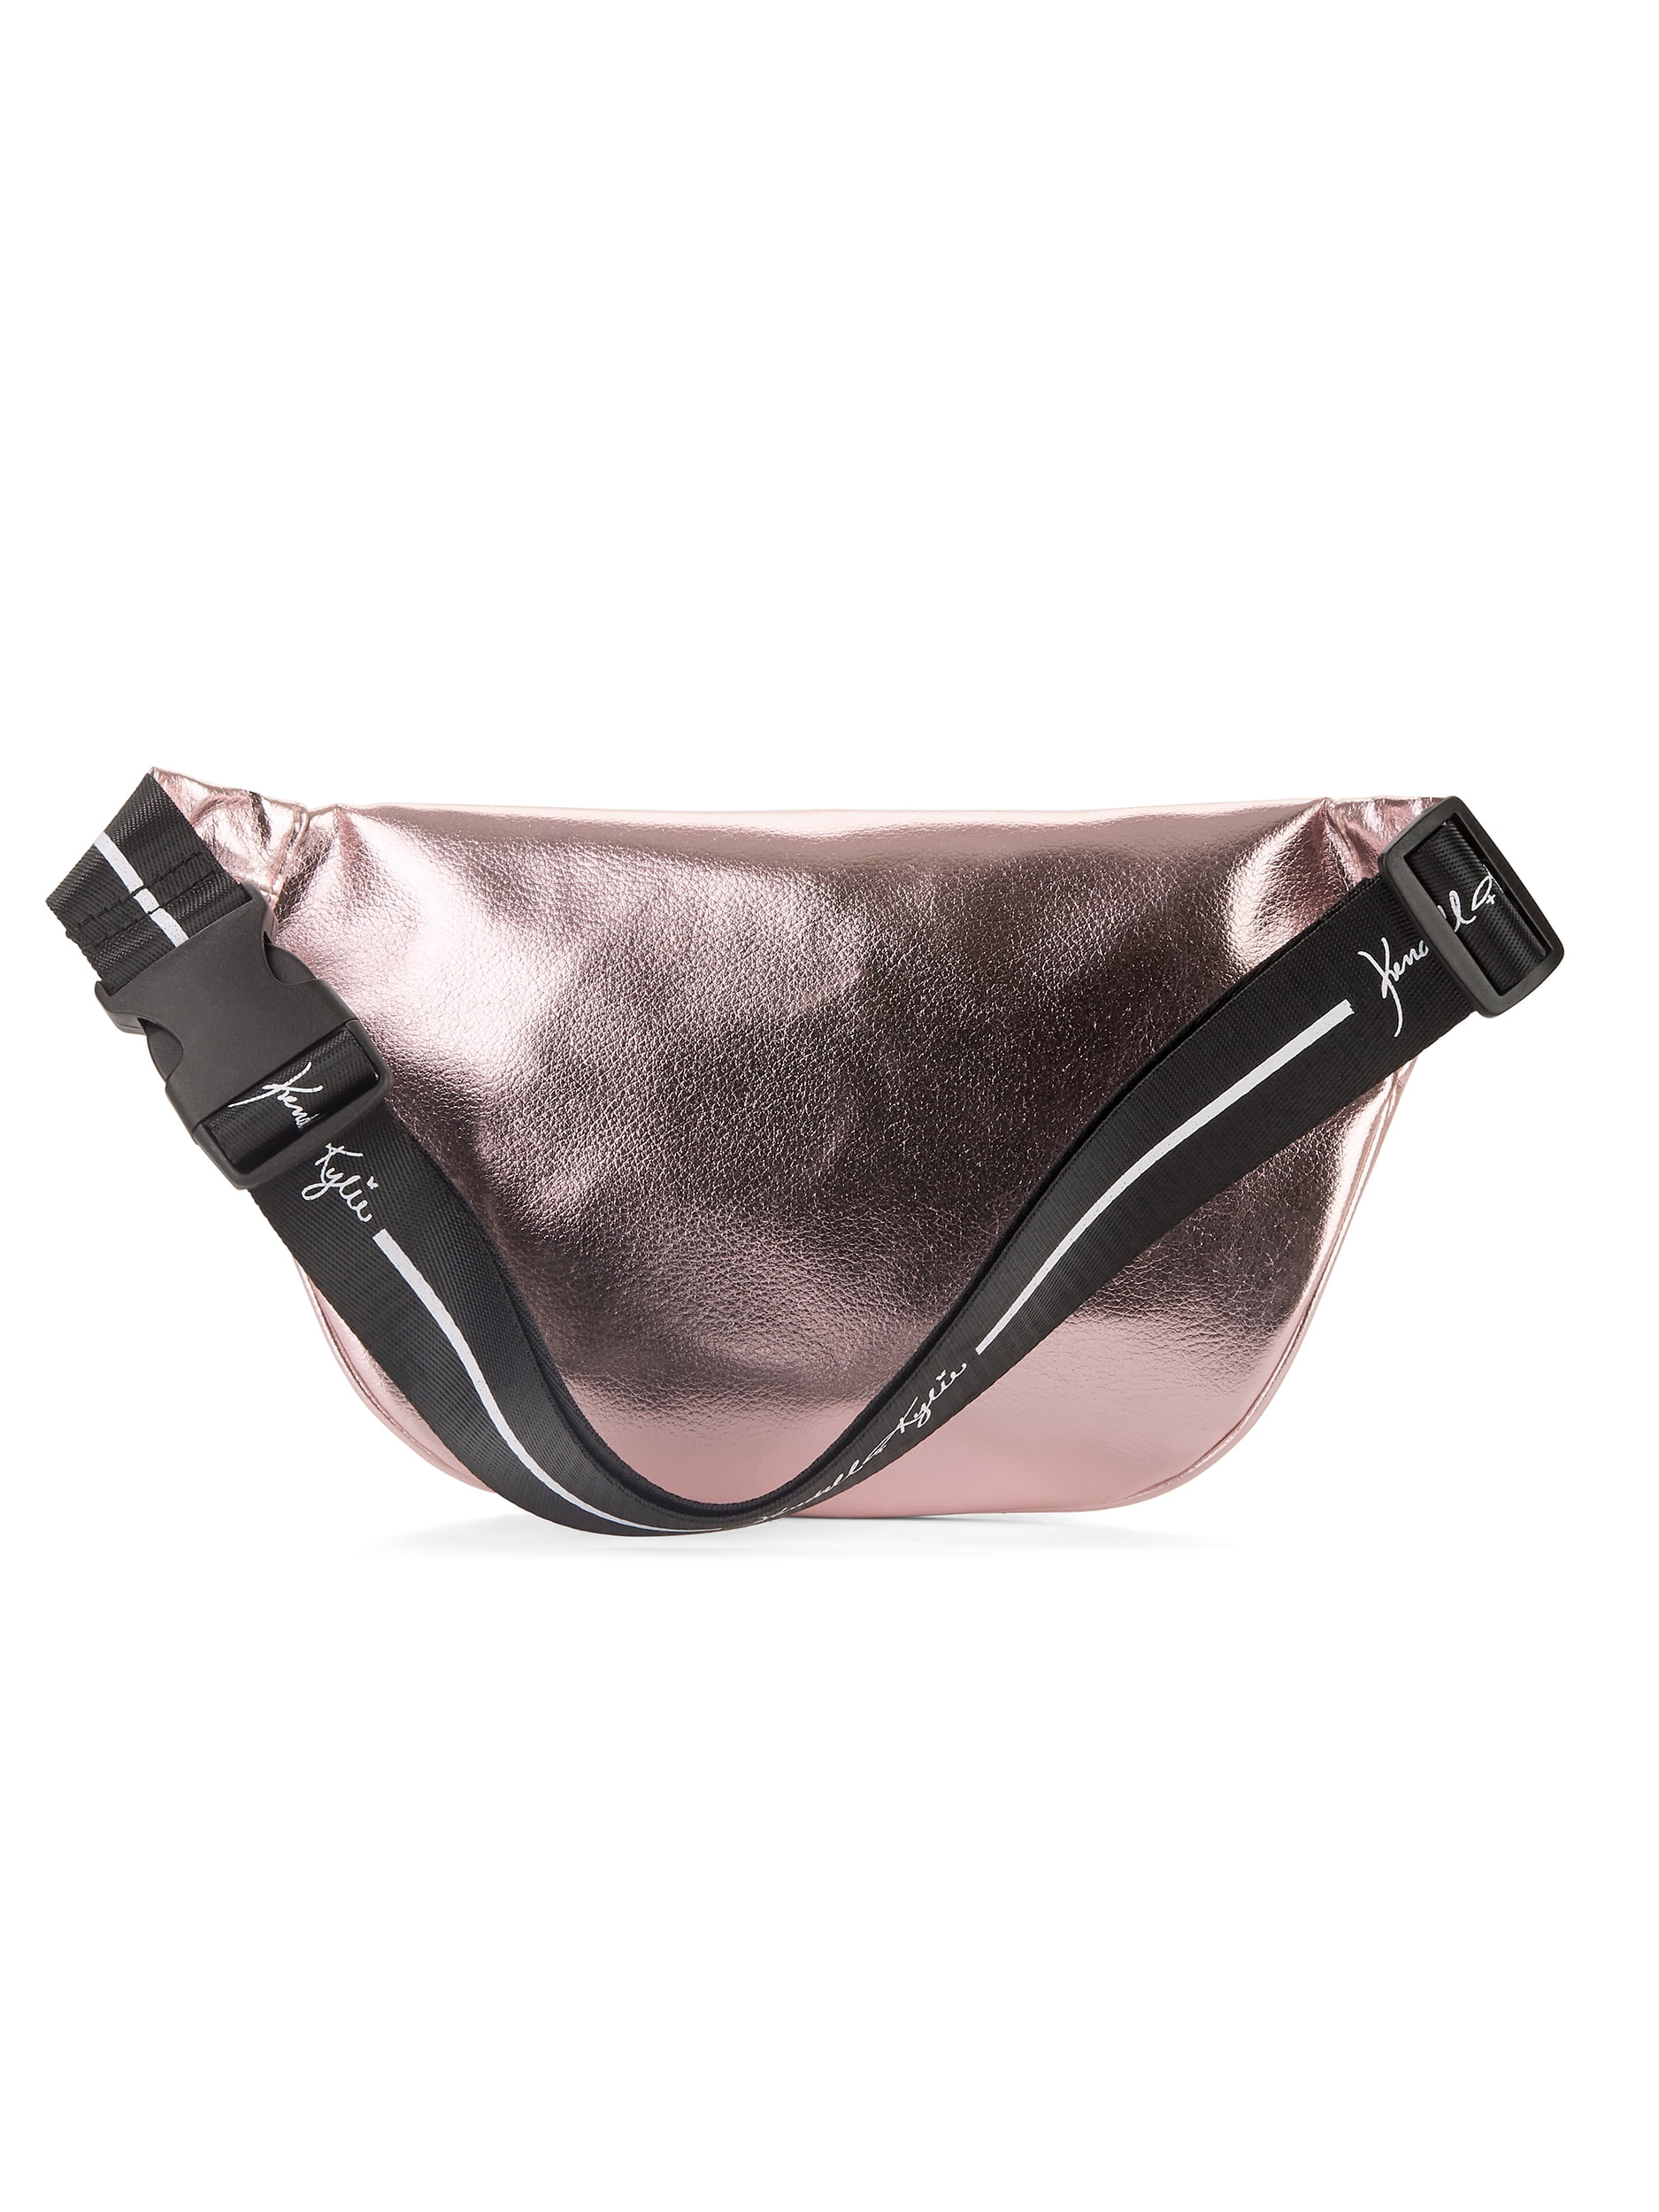 Kendall + Kylie for Walmart Multi Camo Large Fanny Pack 